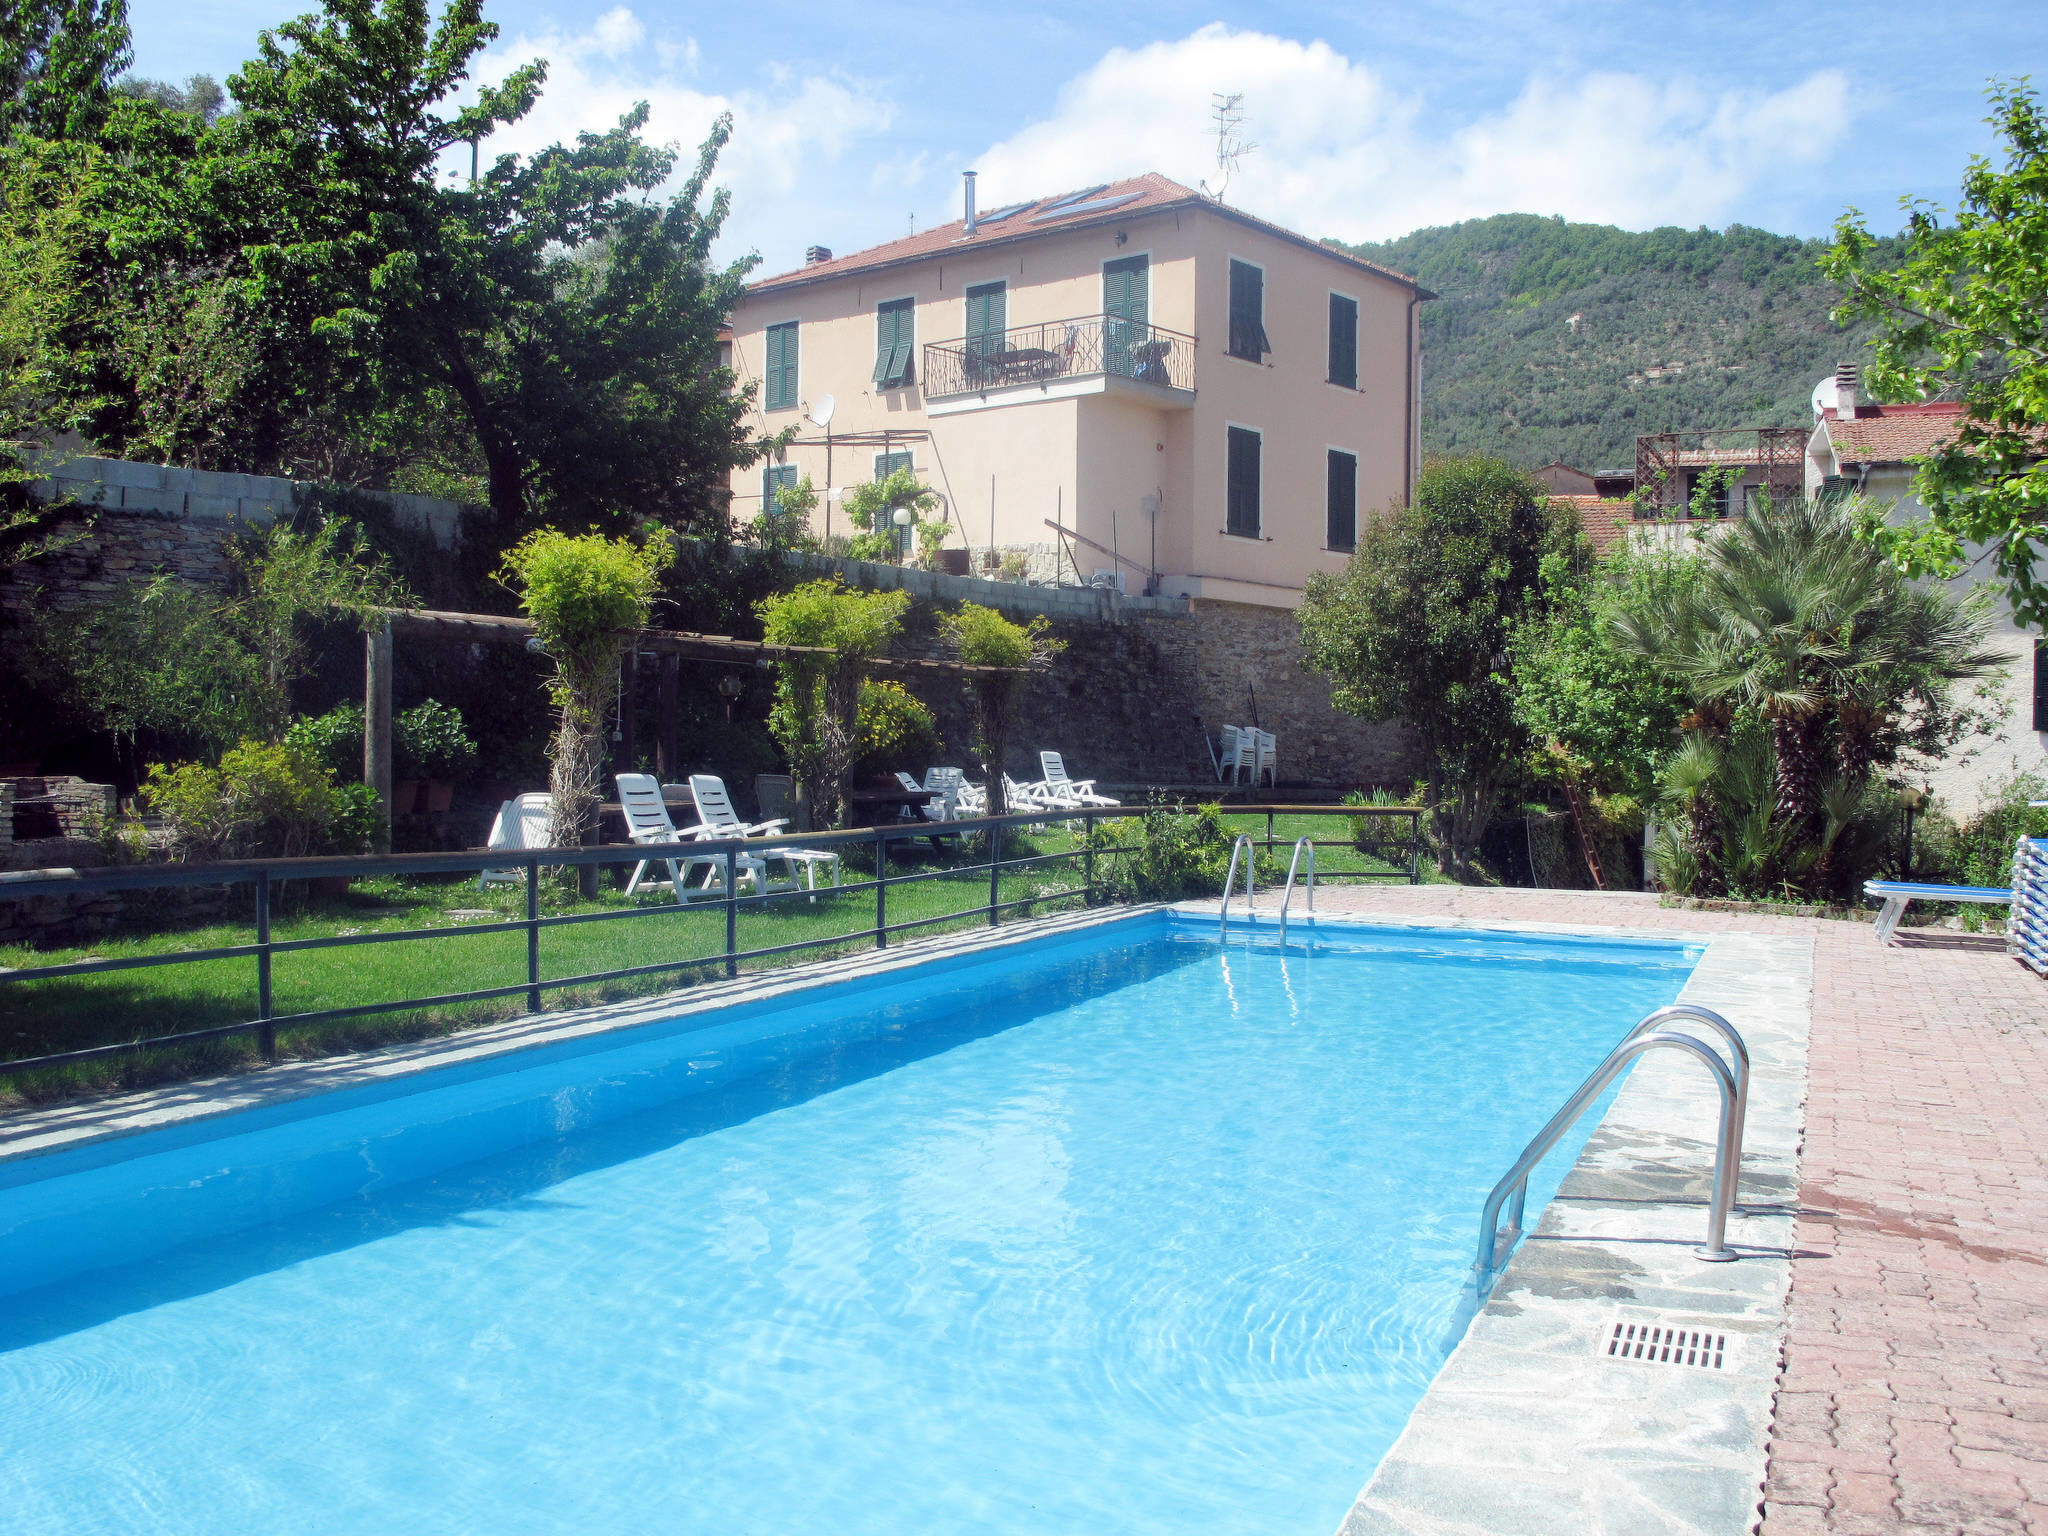 Asplanato  With 1 Bedrooms And 1.5 Bathrooms - Dolcedo